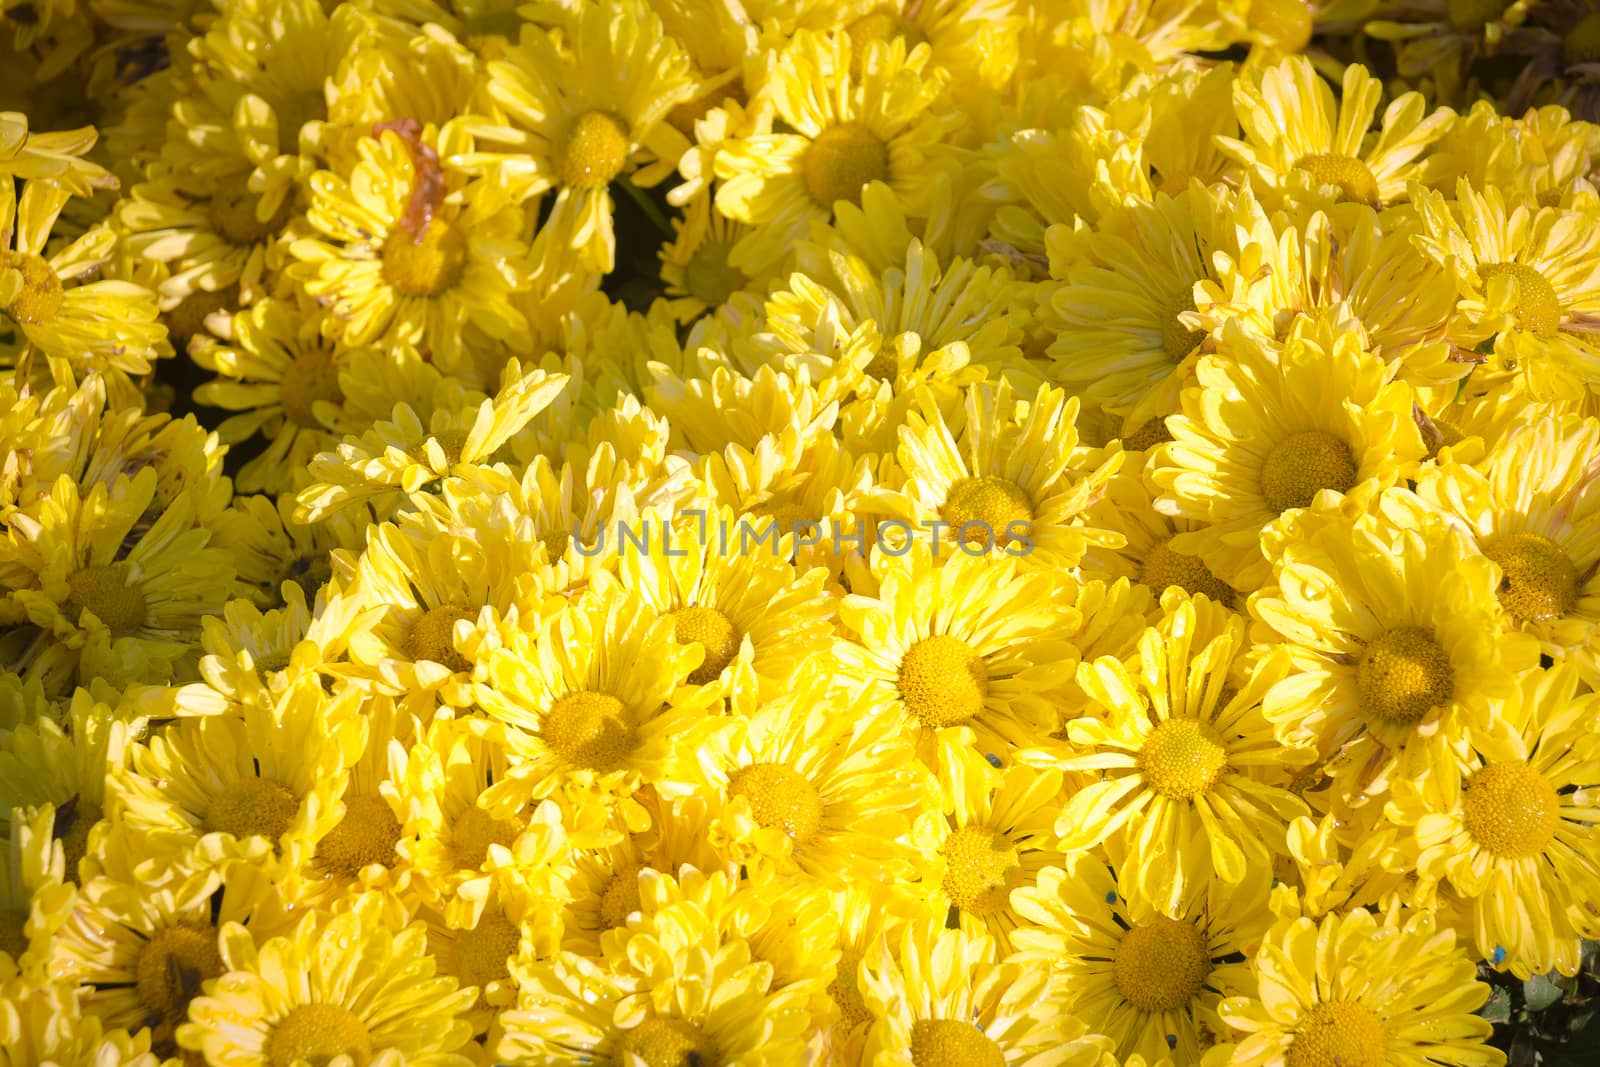  yellow Gerbera daisies background by chingraph